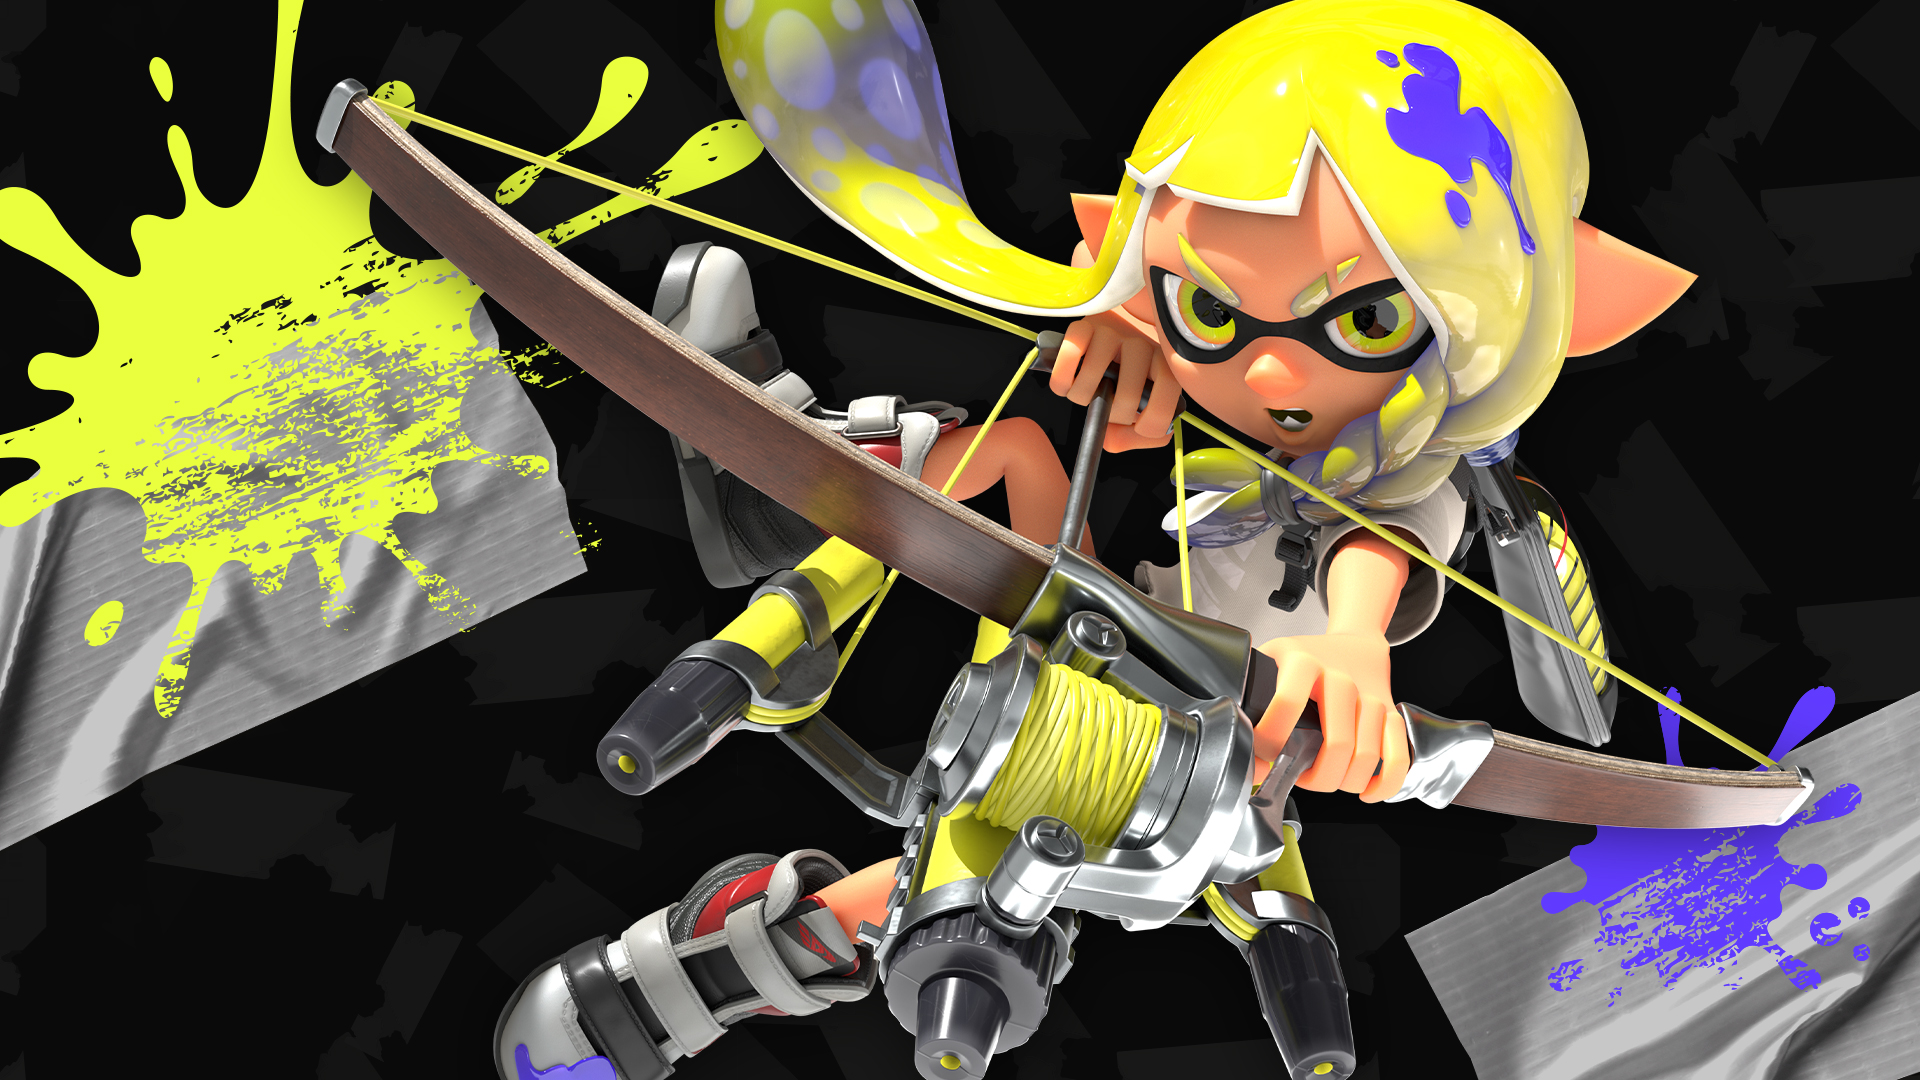 Splatoon North America Sur Twitter Next Up We Ve Obtained Imagery Of A New Class Of Weapon Known As The Stringer It Seems Stringers Can Fire Ink Horizontally Or Vertically Depending On Whether